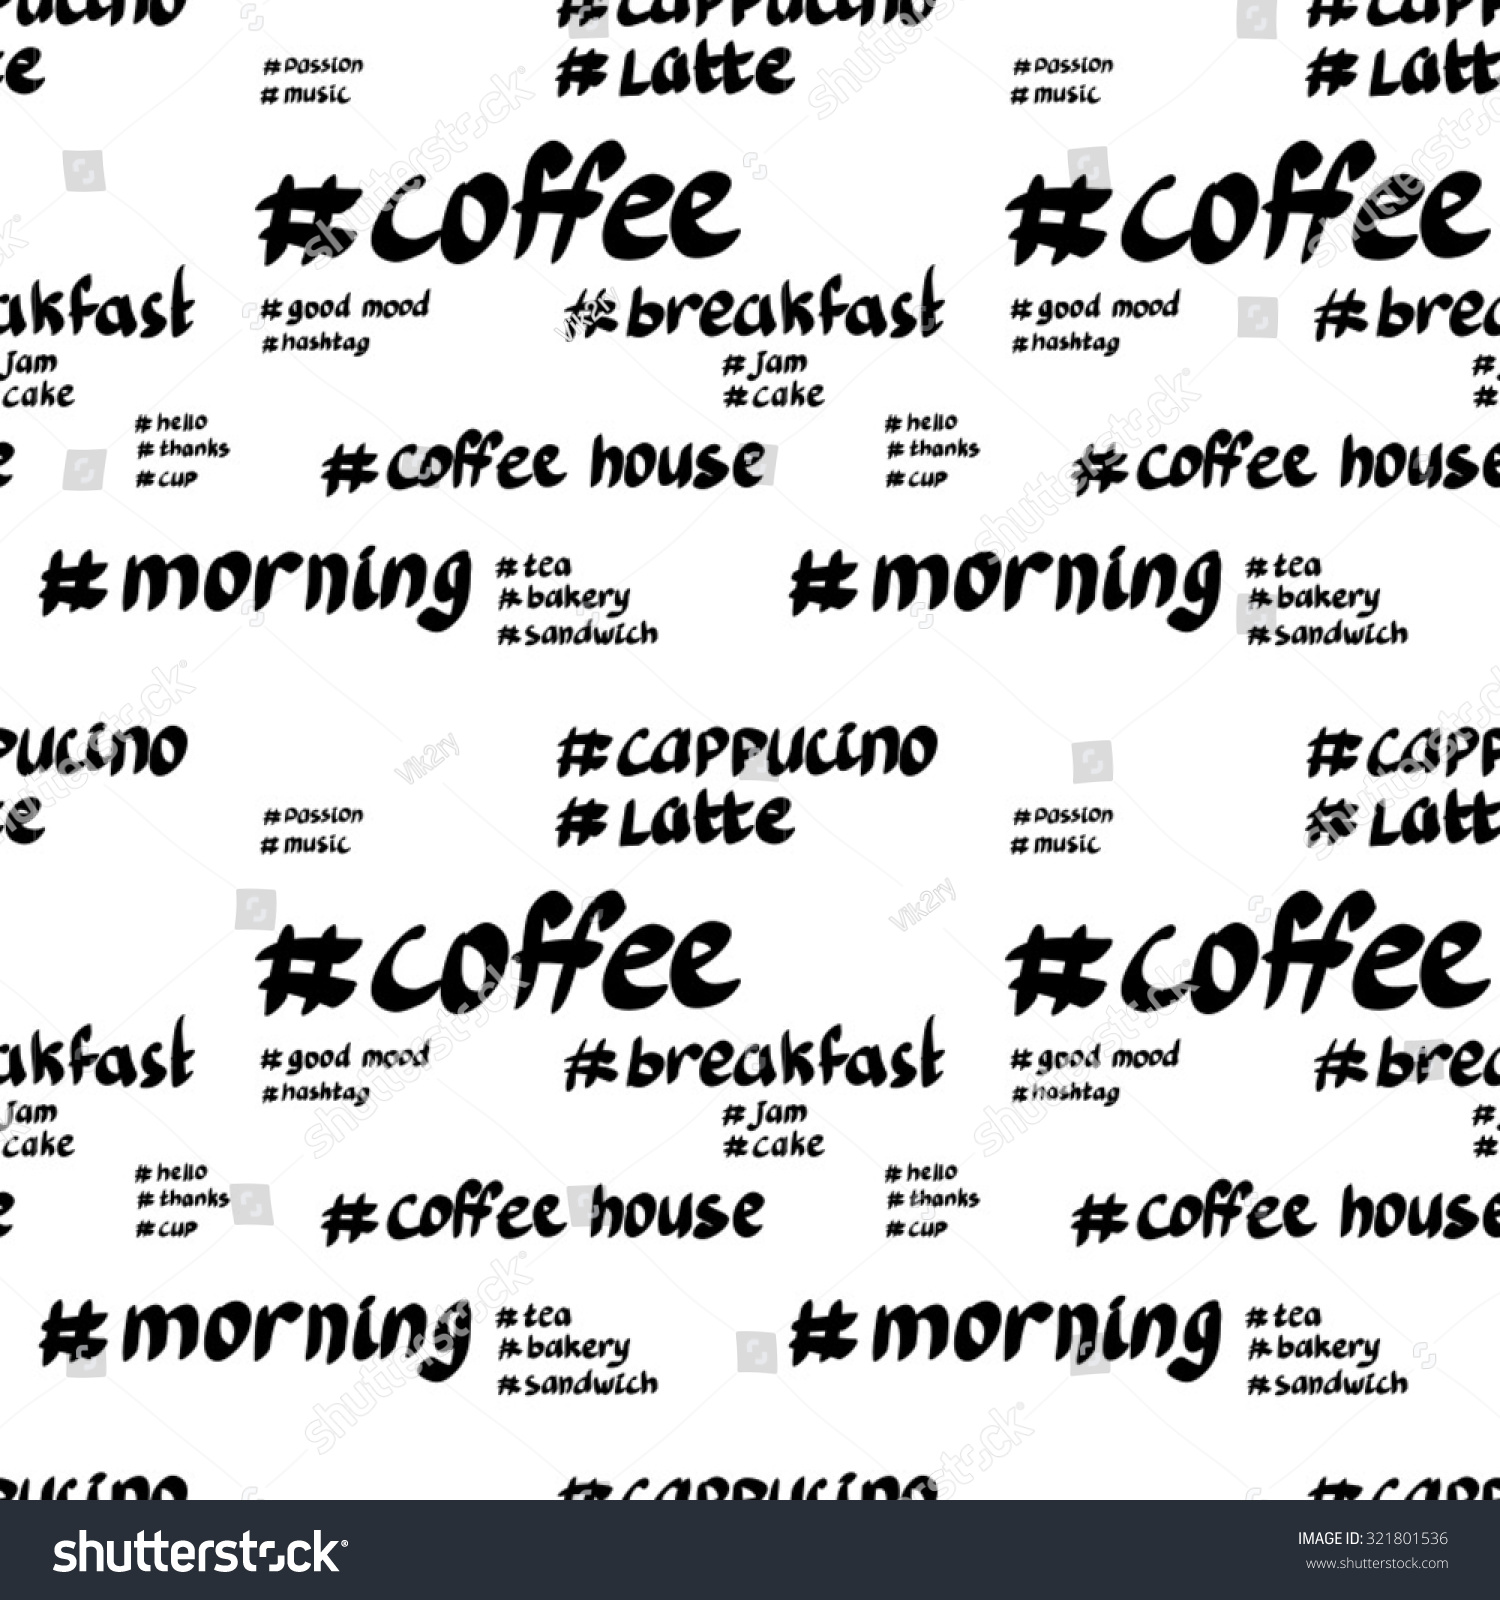 Pattern Words Hashtags About Coffee Backgrounds Textures Food